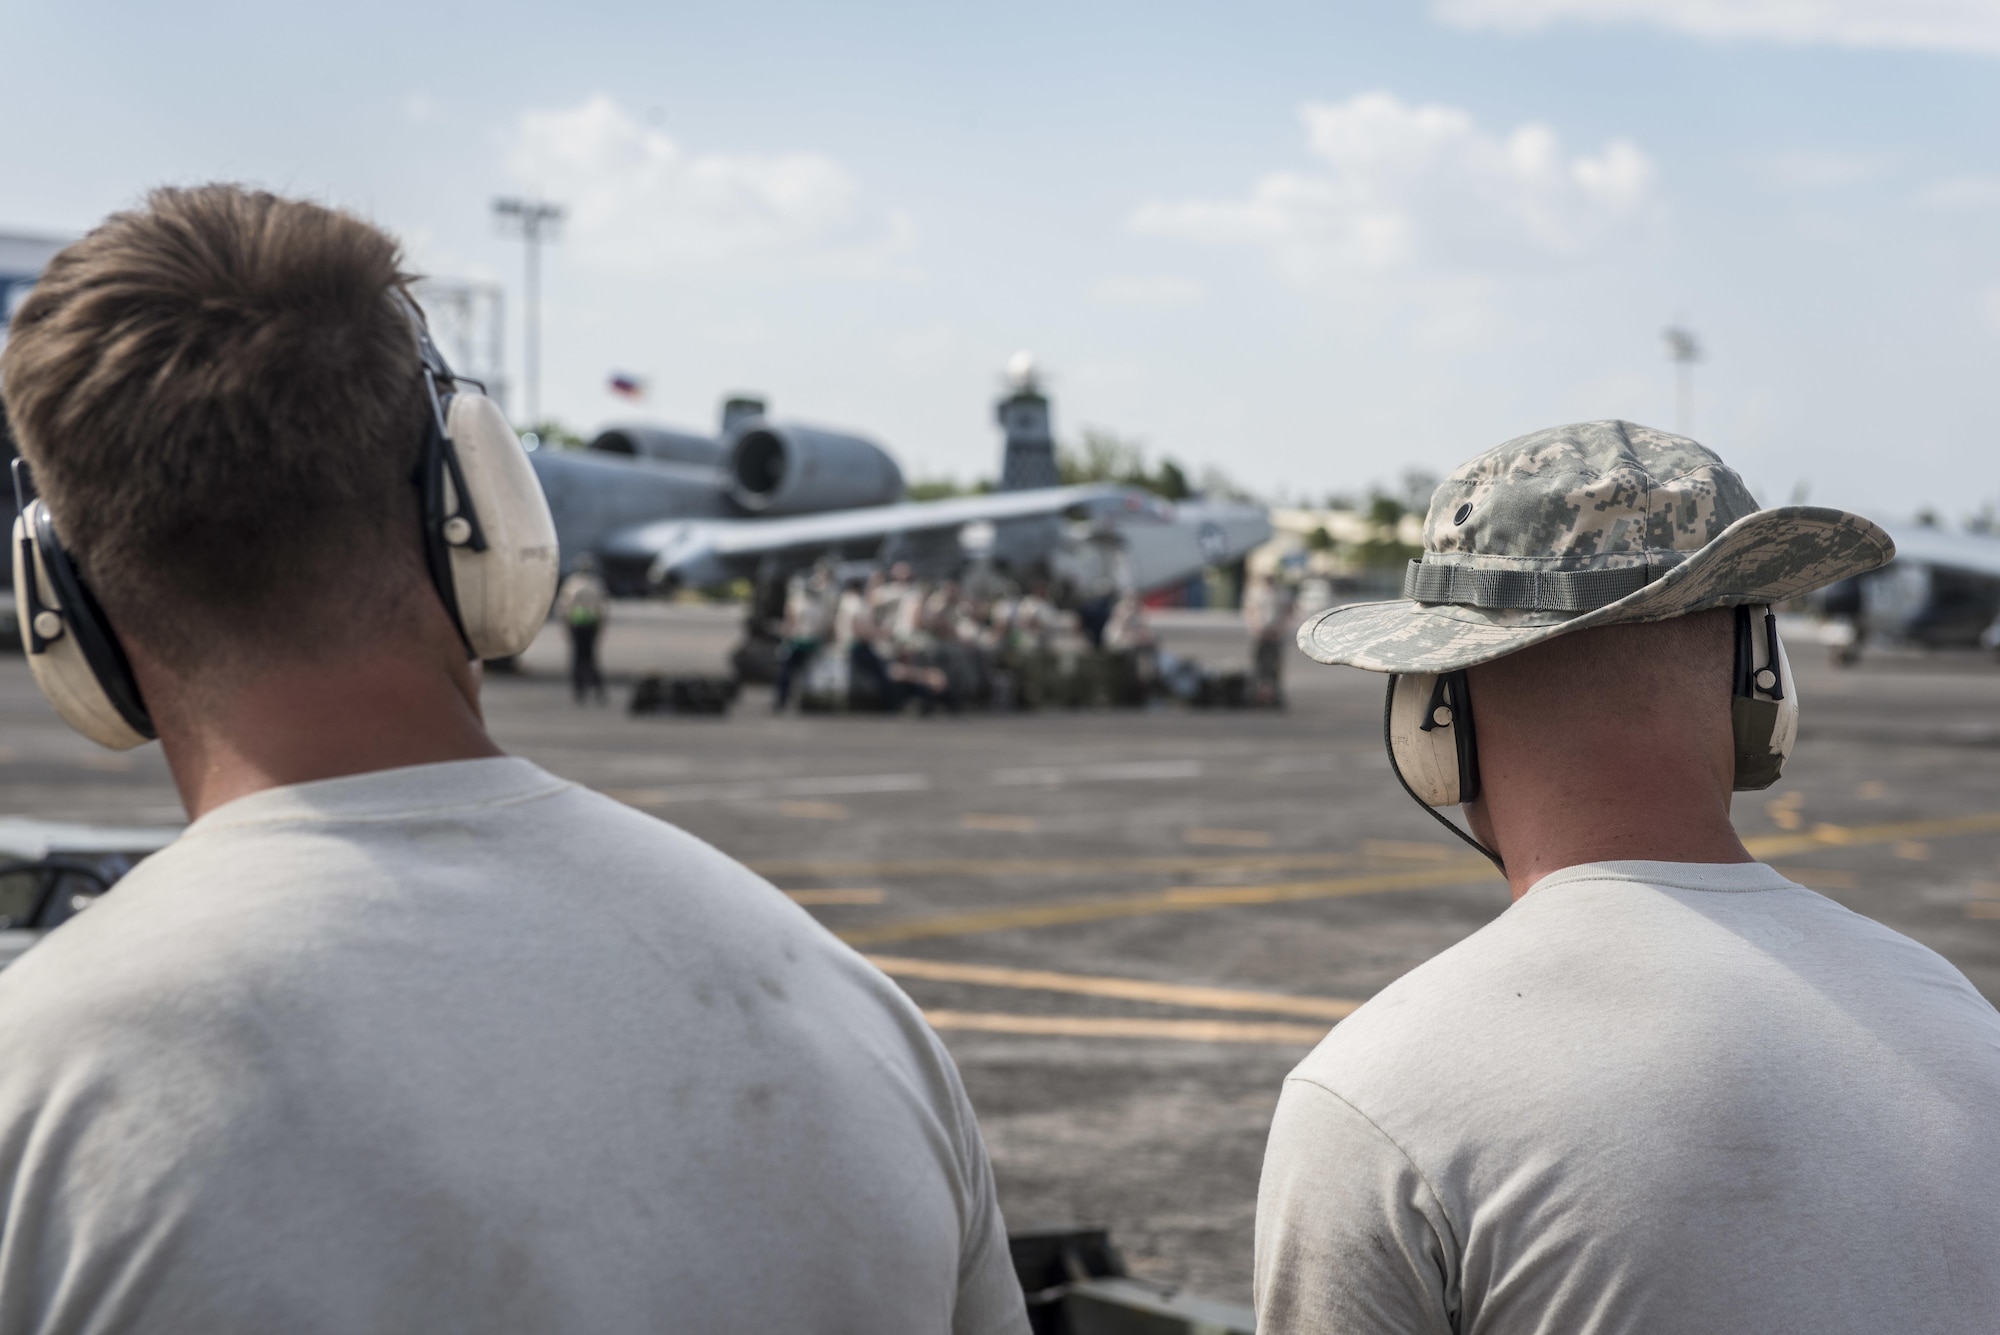 Two U.S. Air Force maintenance Airmen, with the 51st Fighter Wing, Osan Air Base, Republic of Korea, take a break after successfully launching two A-10C Thunderbolt IIs at Clark Air Base, Philippines, April 19, 2016. Maintenance Airmen play a critical role in the newly stood up Air Contingent’s ongoing operations ranging from air and maritime domain awareness, personnel recovery, combating piracy, and assurance all nations have access to the regional air and maritime domains in accordance with international law. The A-10C is capable of loitering close to the surface for extended periods to allow for excellent visibility over land and sea domains and can be serviced and operated from austere bases with limited facilities. (U.S. Air Force photo by Staff Sgt. Benjamin W. Stratton)